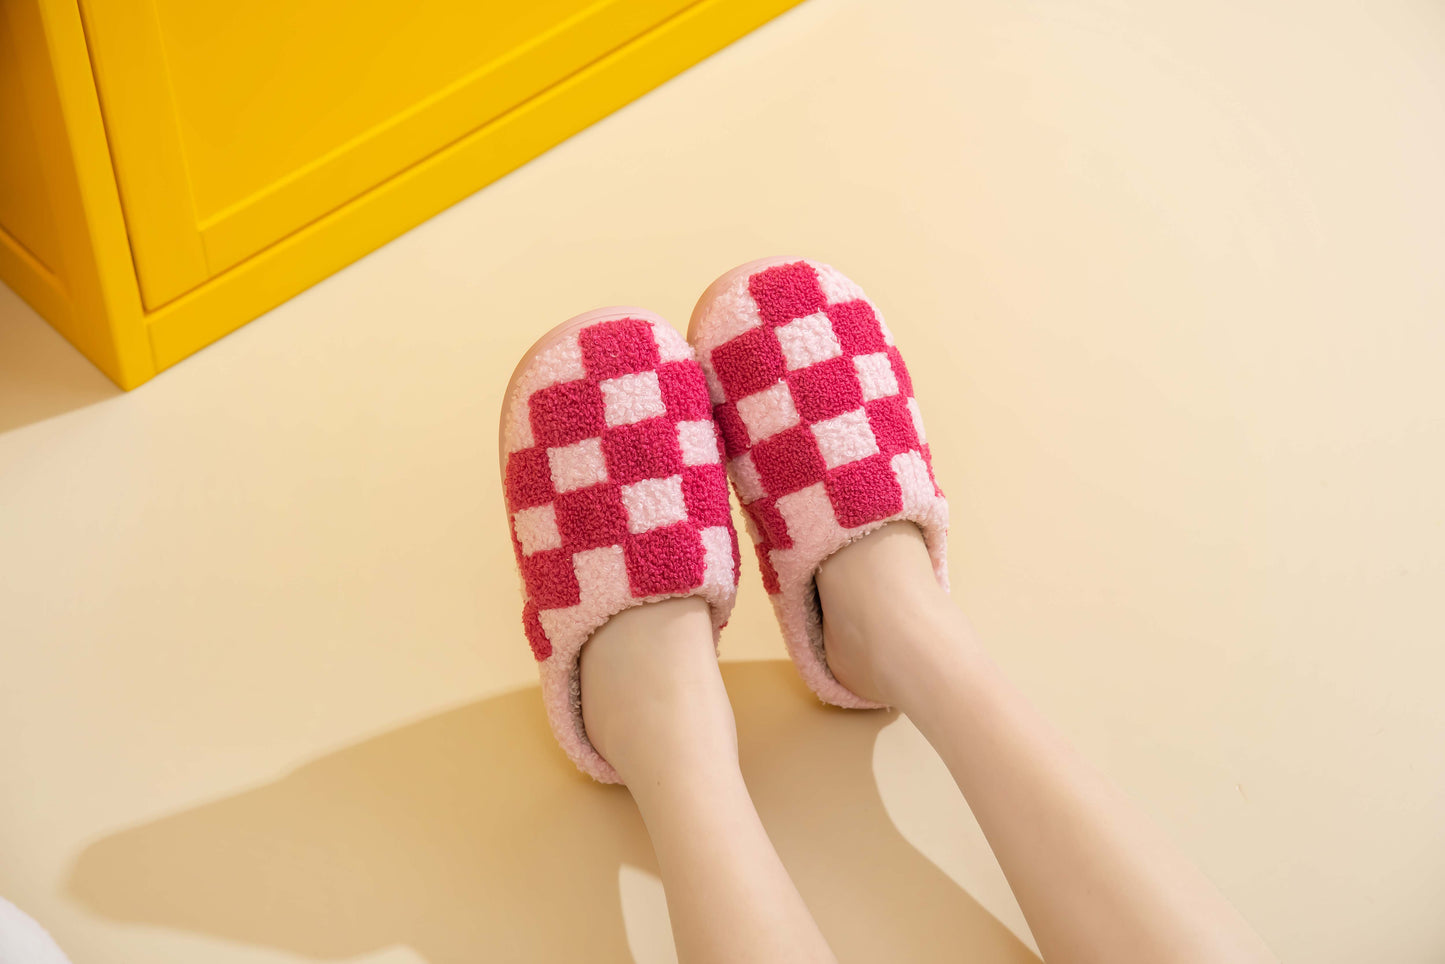 Checkered Pattern Illustrated Comfort Cozy Plush Fluffy Fur Slip On Cushion Slippers